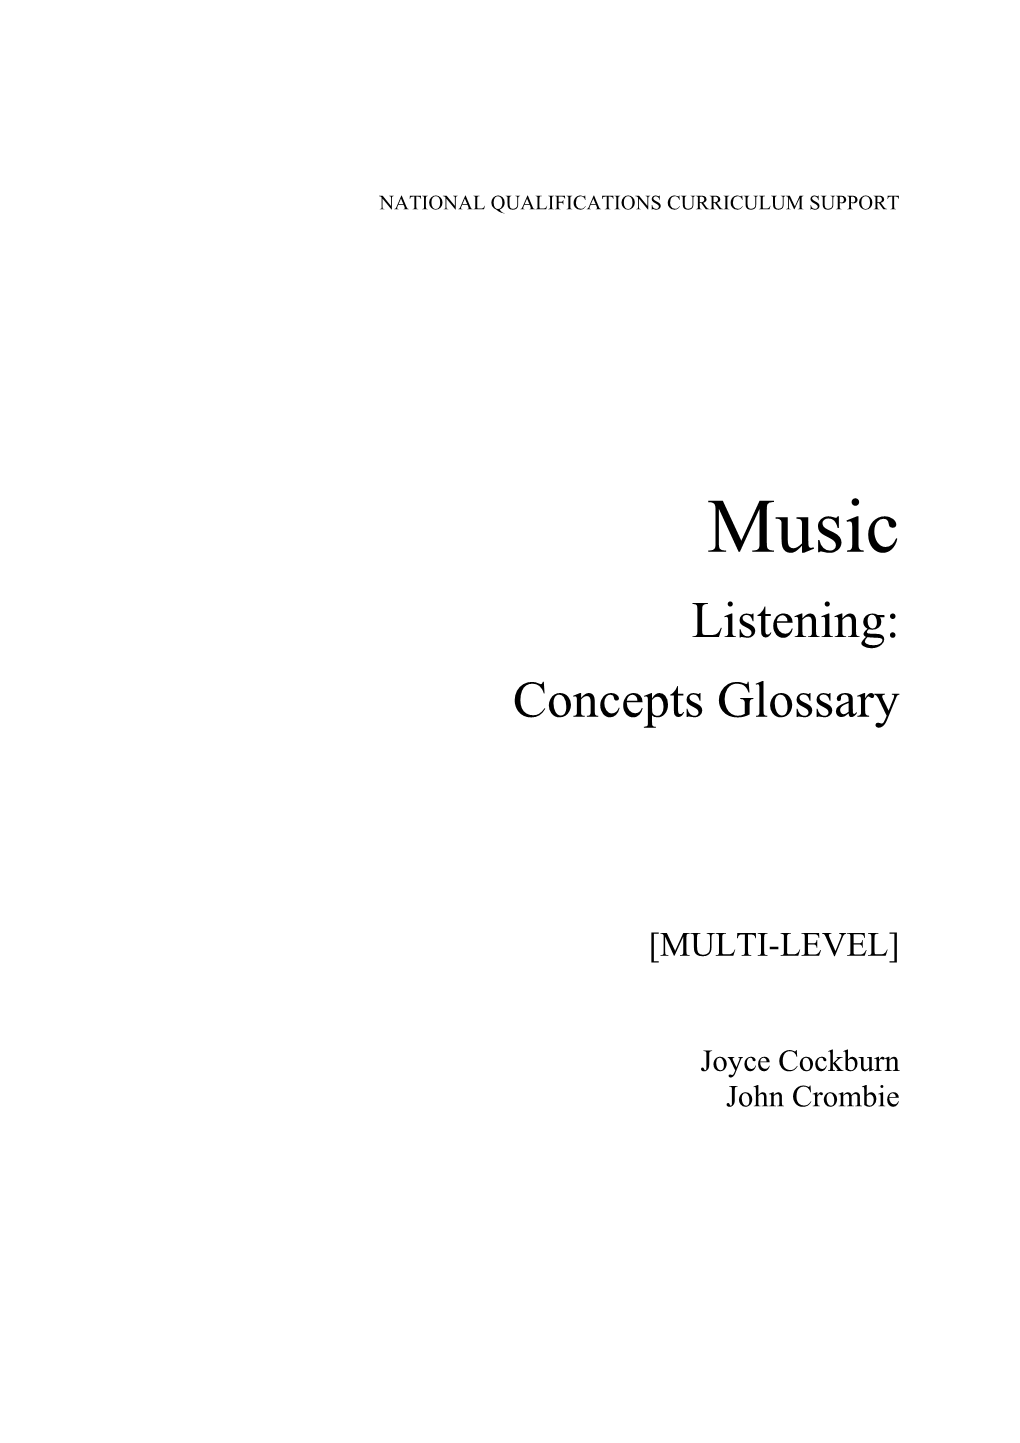 Music: Listening - Concepts Glossary